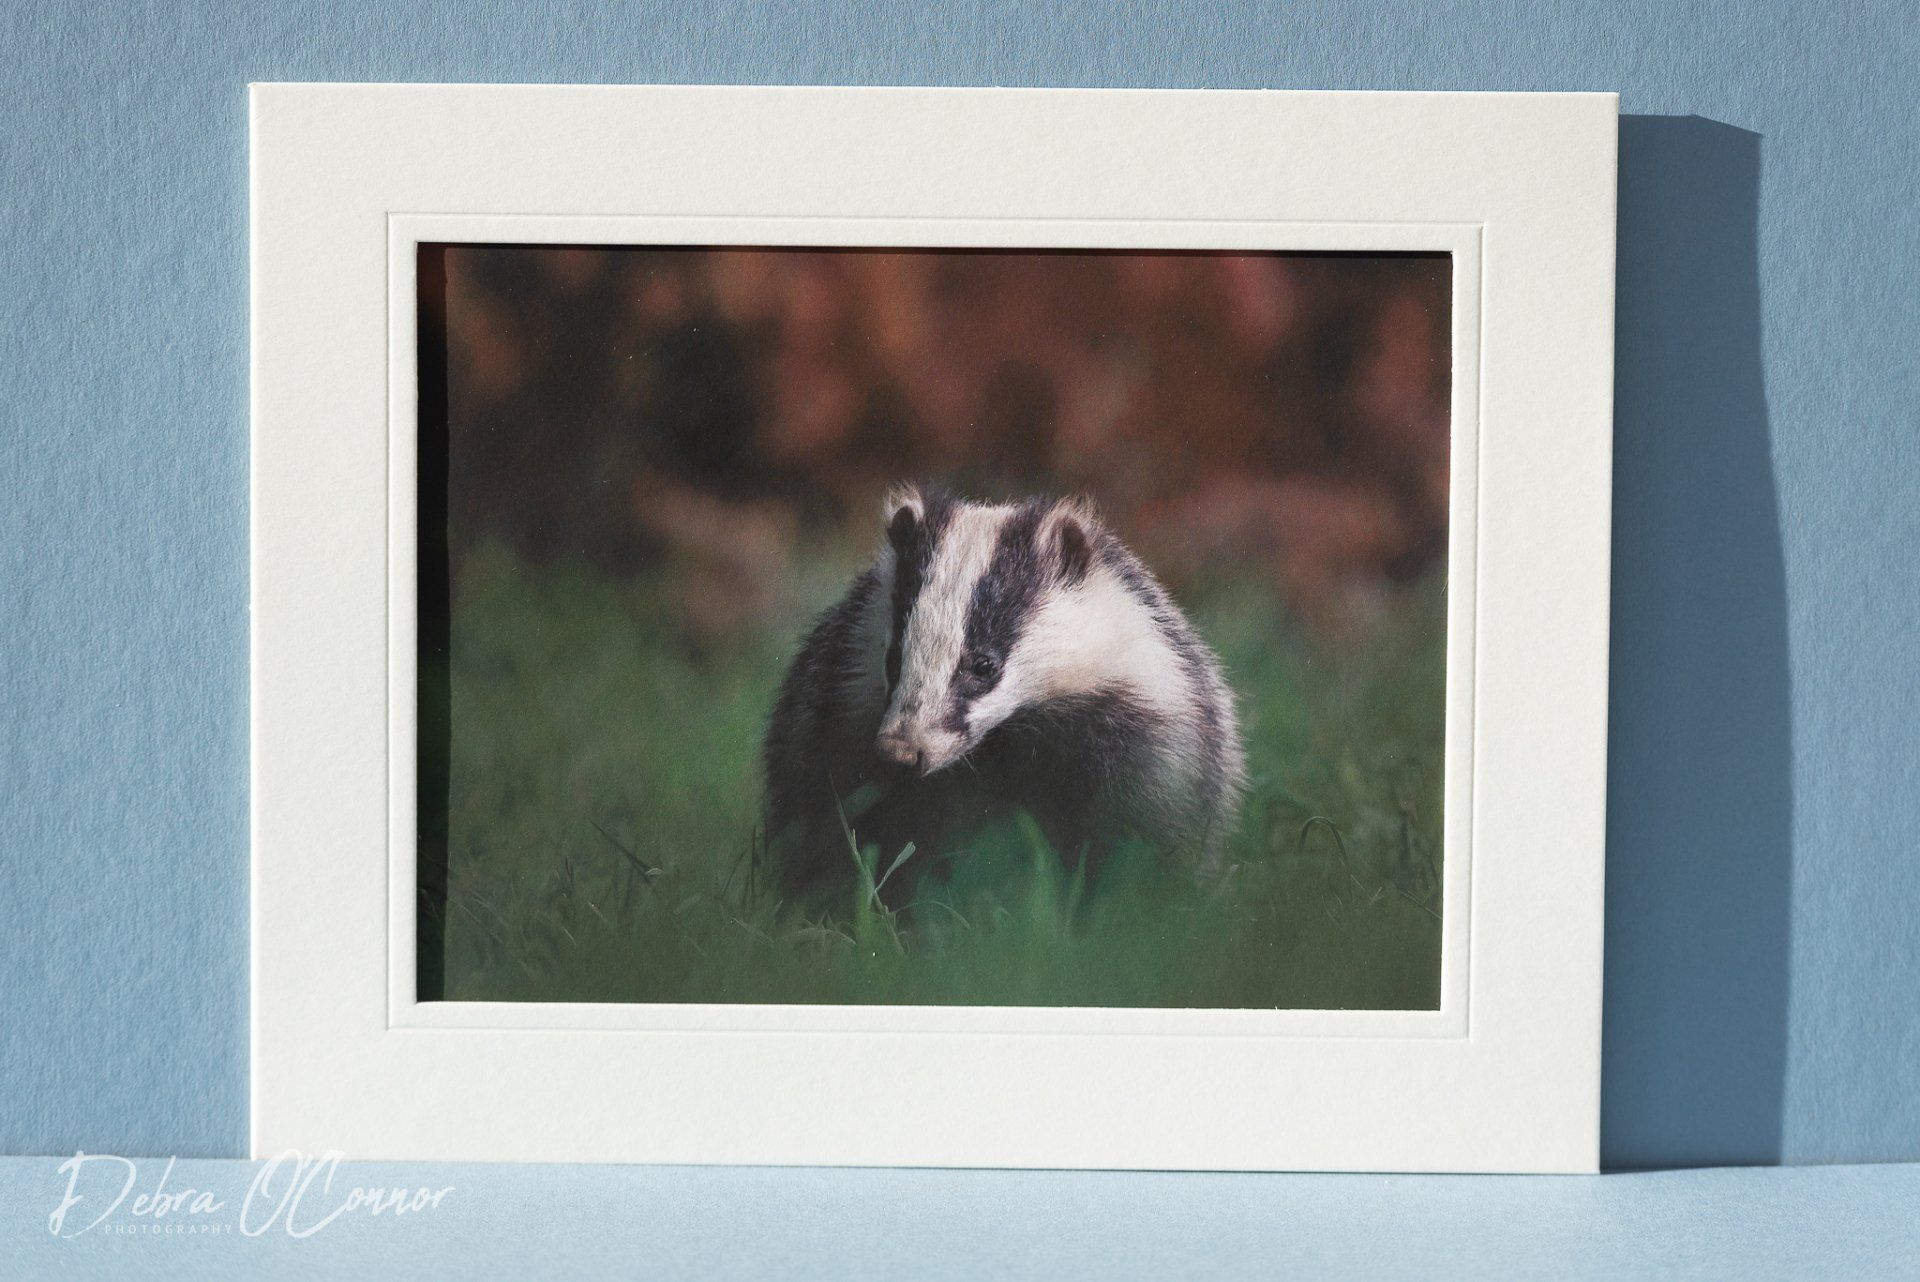 For sale, beautiful badger photograph